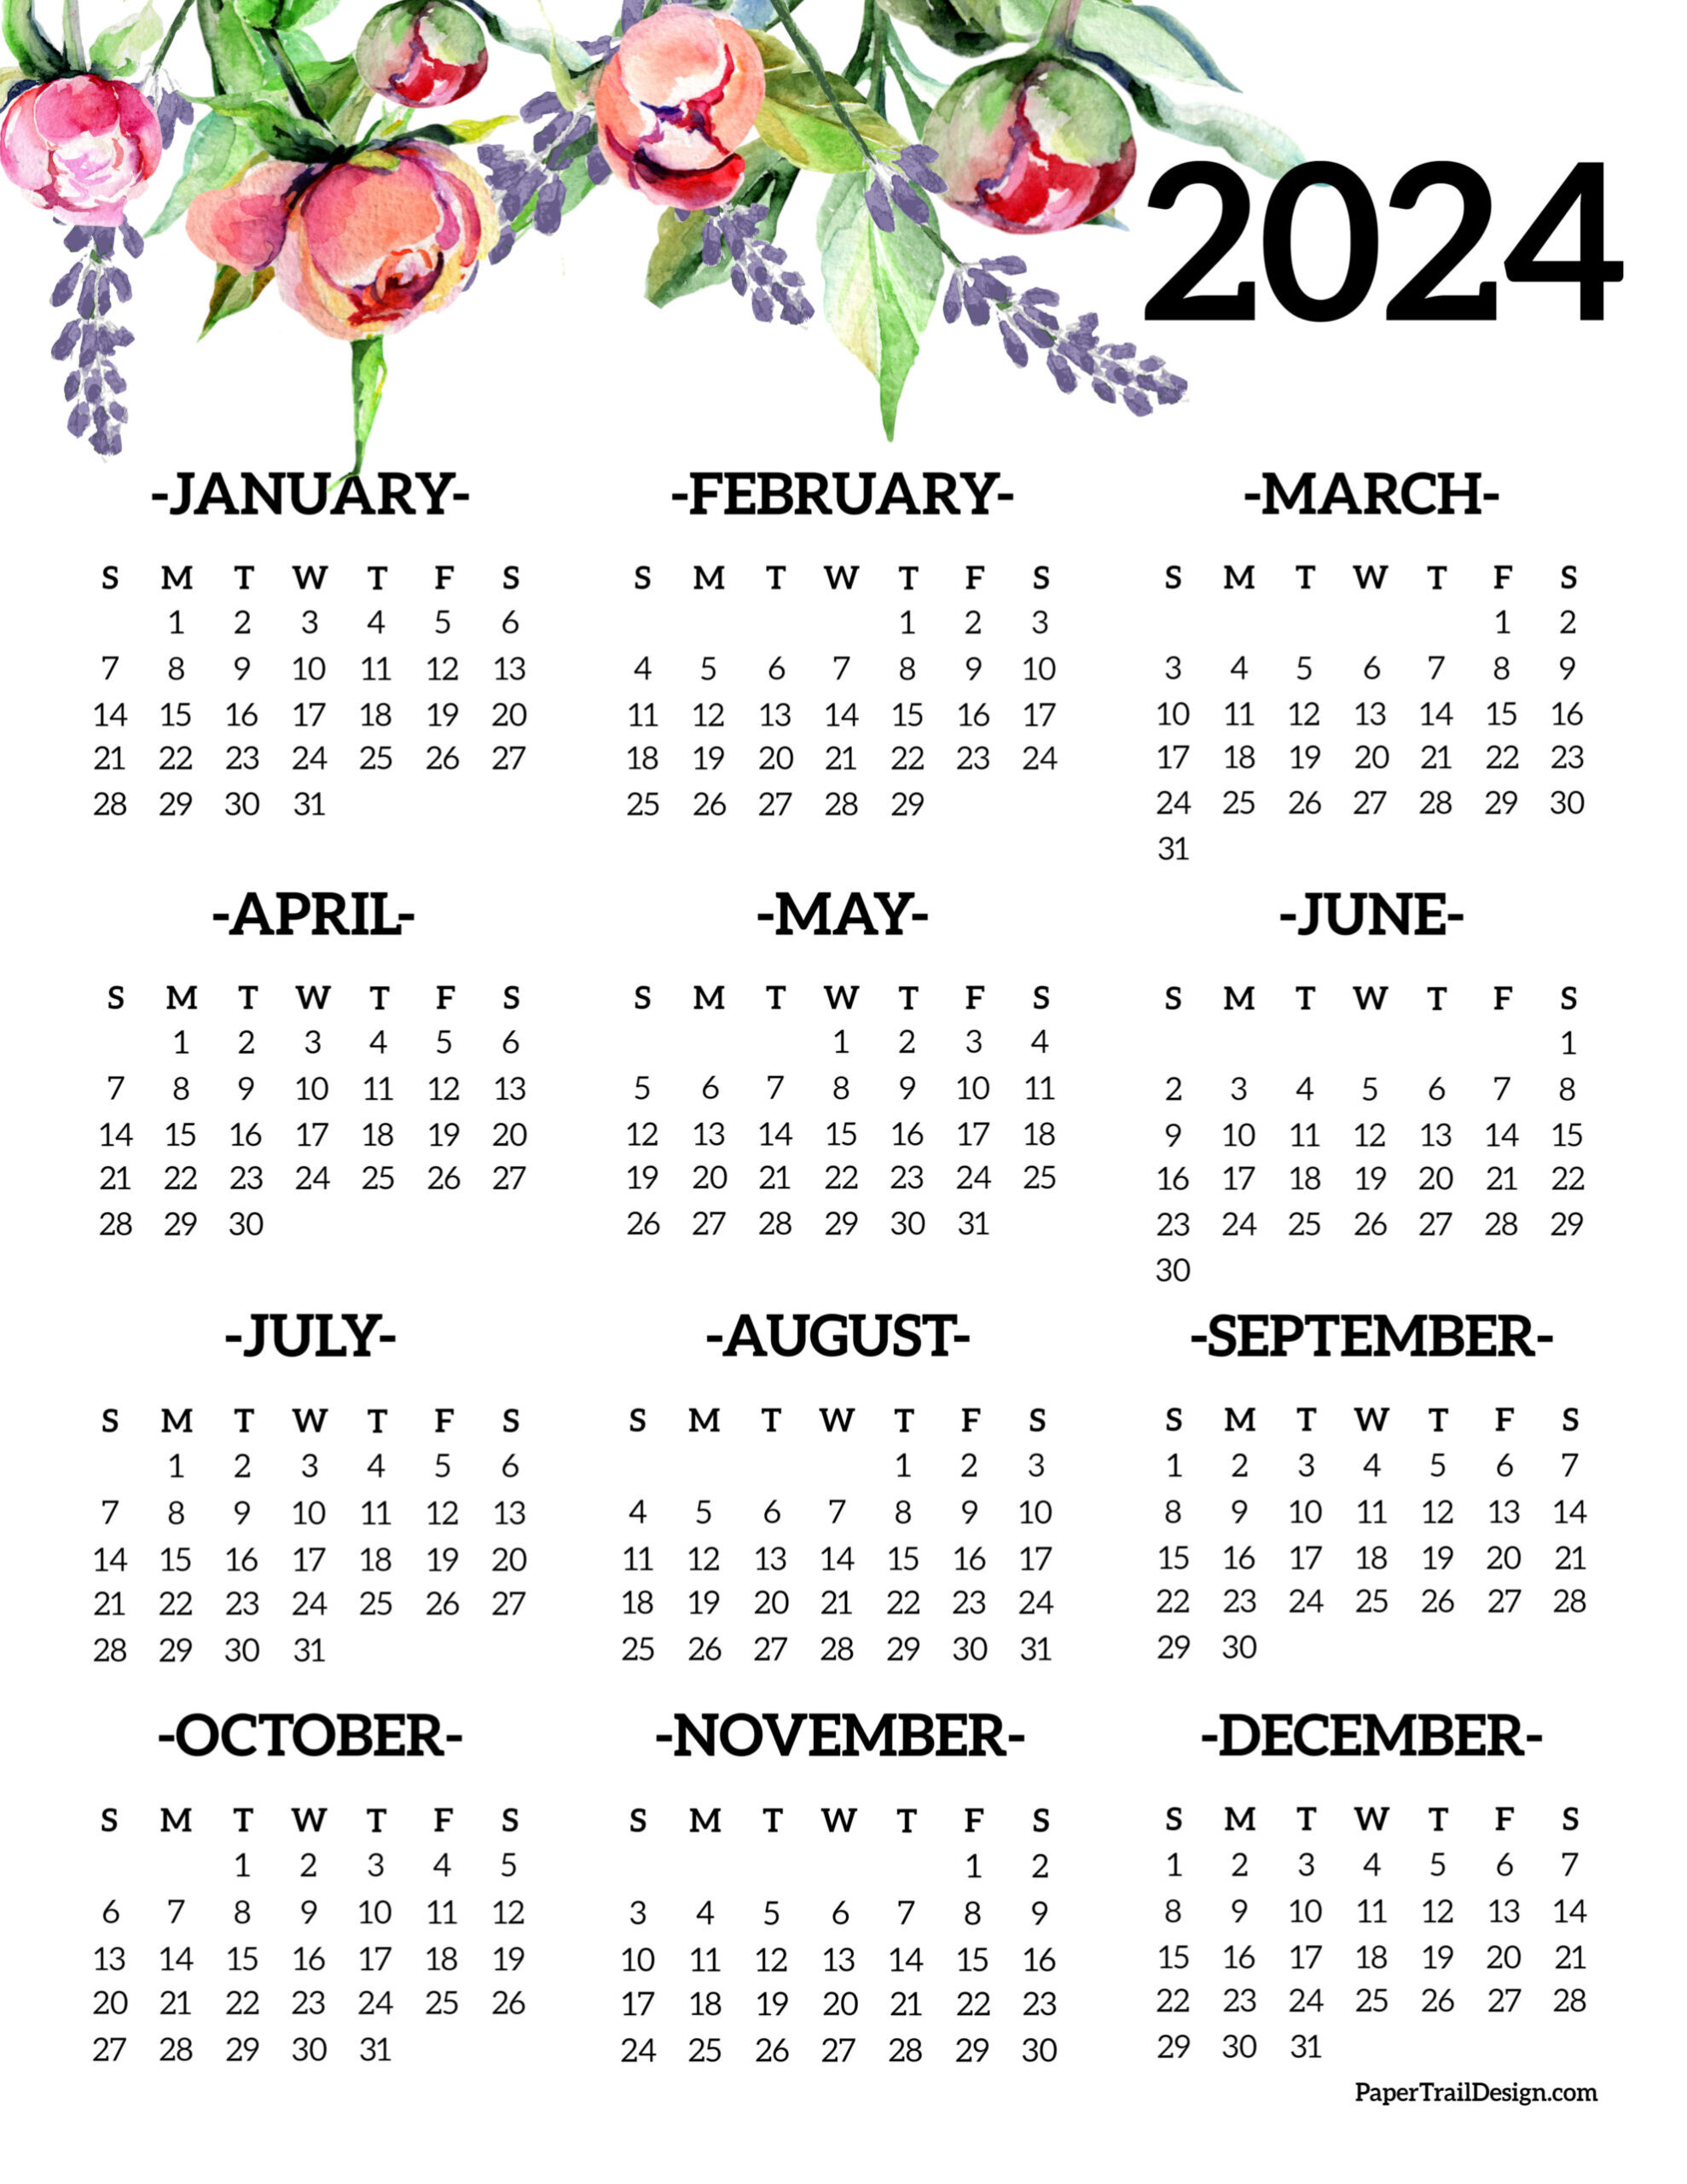 Calendar 2024 Printable One Page - Paper Trail Design for 1 Page Printable Calendar 2024